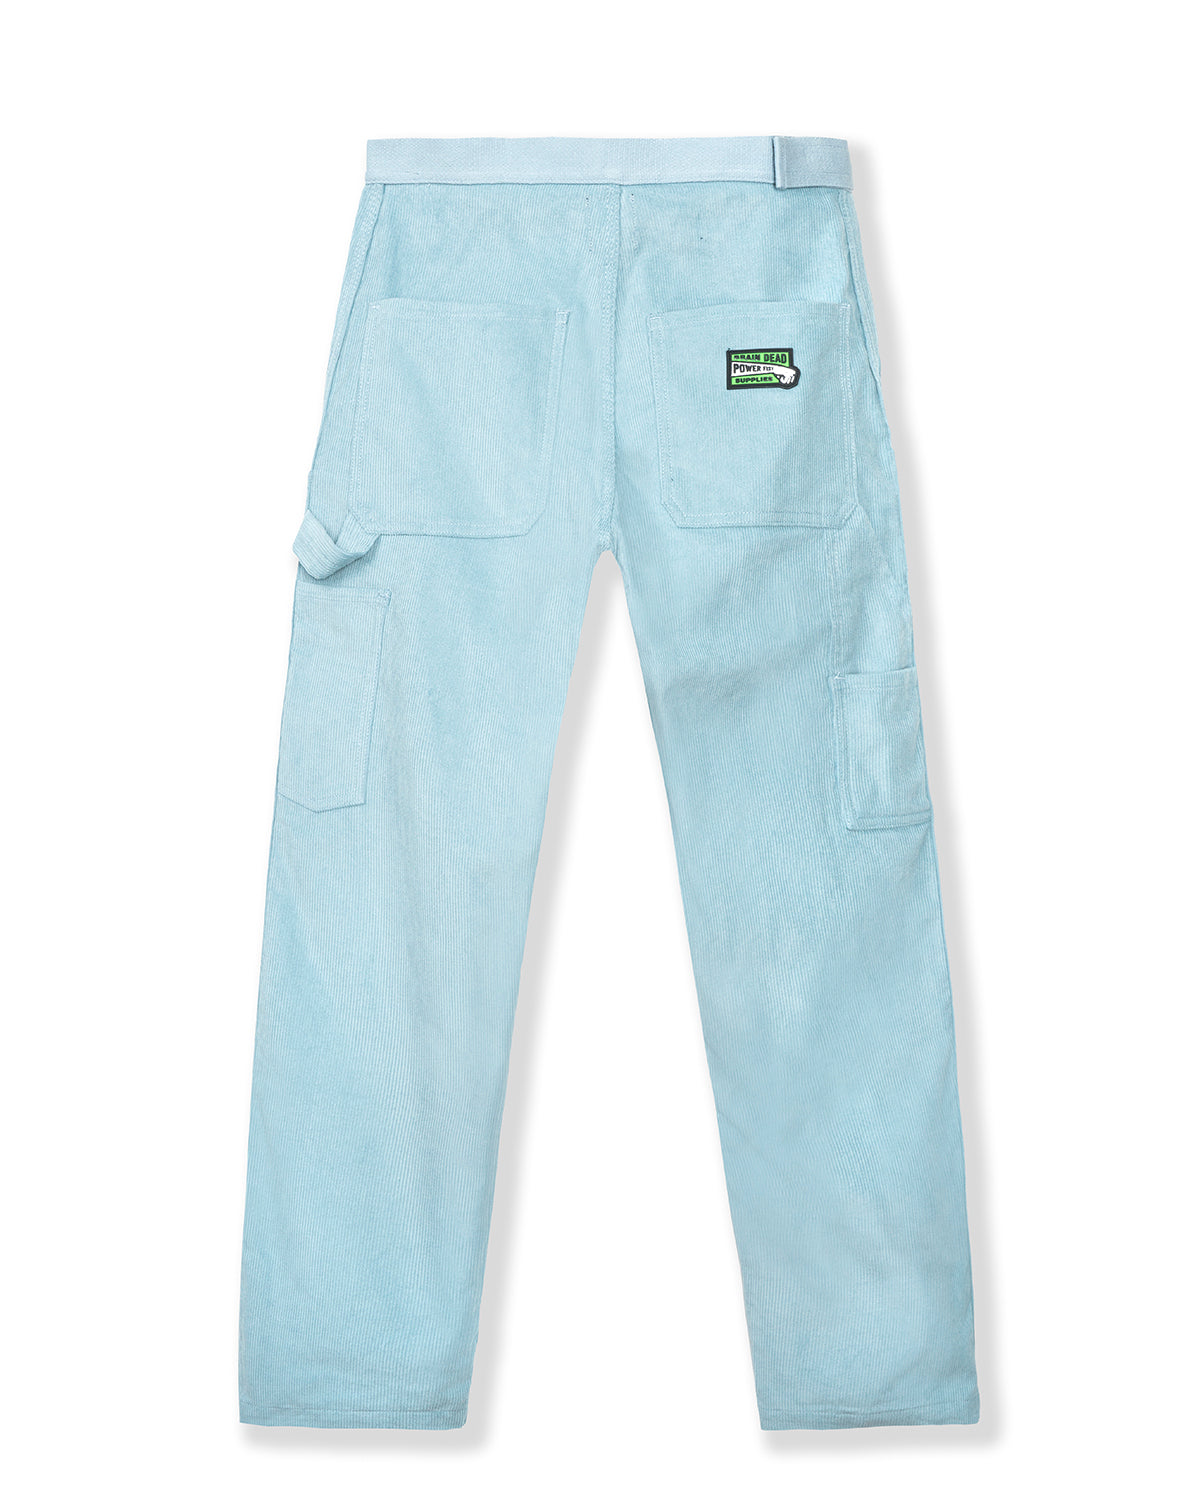 green high waisted trousers